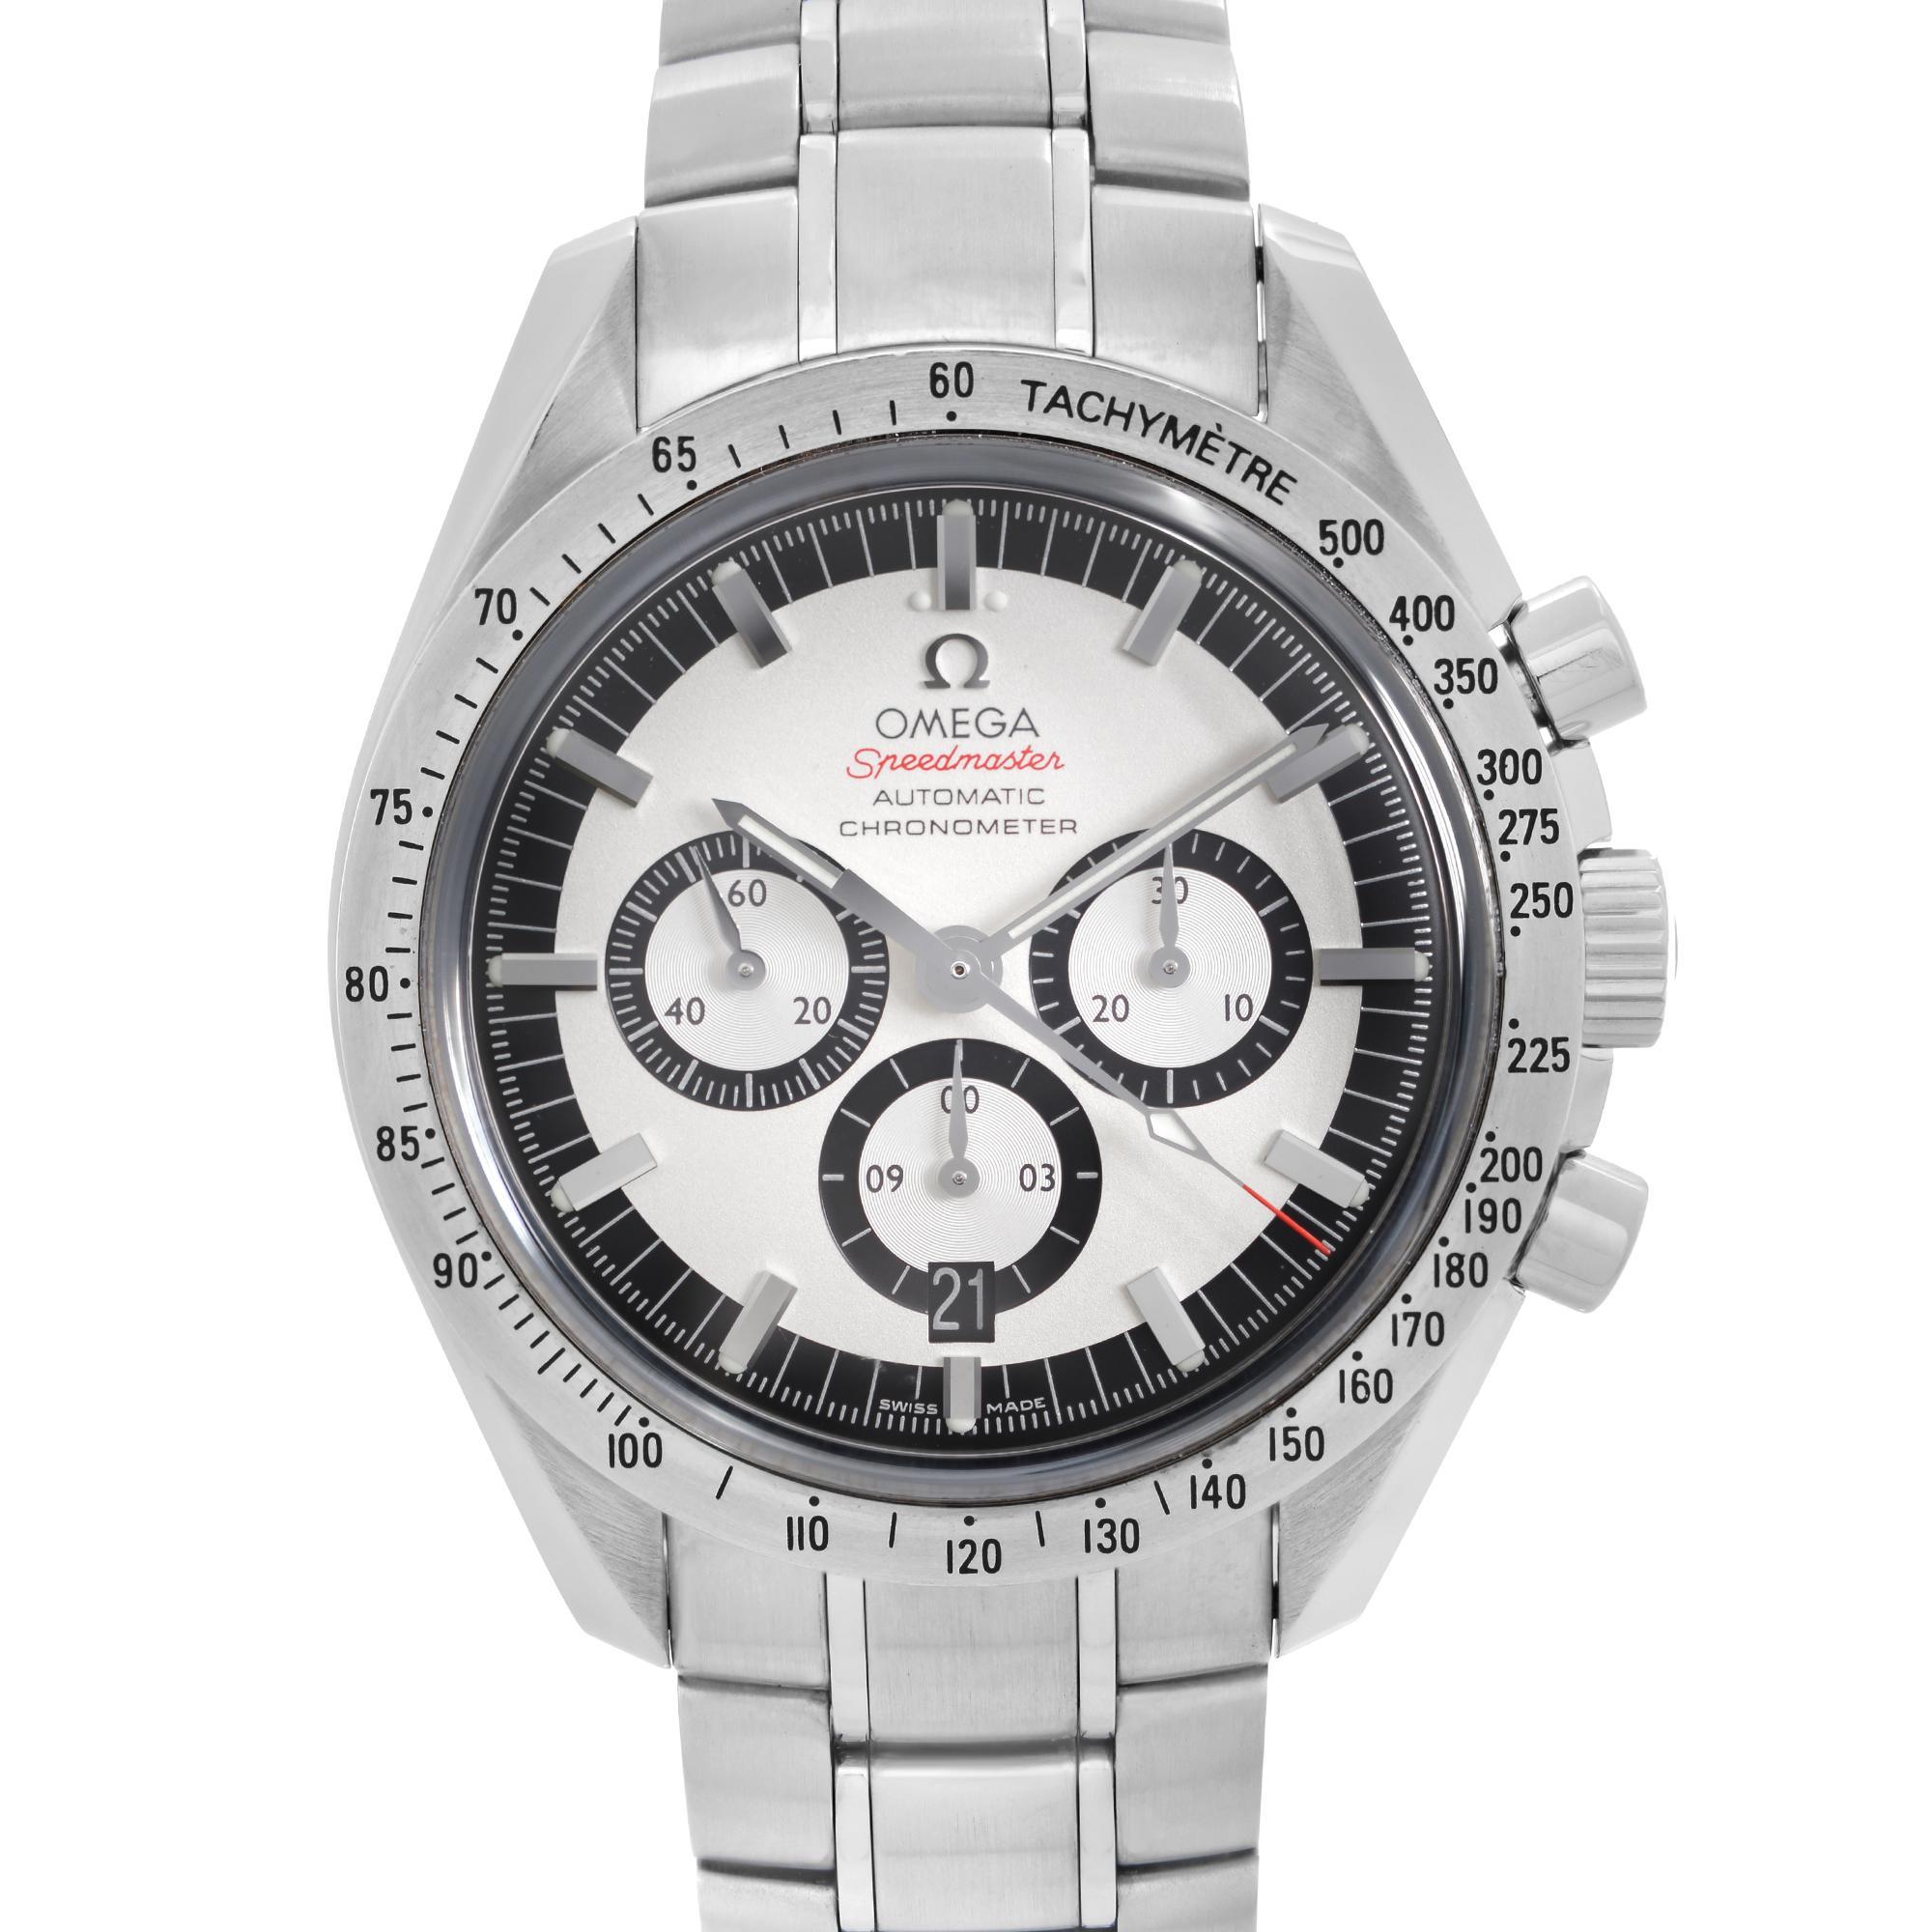 Mint Pre-owned Omega Speedmaster Legend 42mm Steel White Dial Automatic Mens Watch 3506.31.00. This Beautiful Timepiece is Powered by Mechanical (Automatic) Movement And Features: Round Stainless Steel Case & Bracelet, Fixed Stainless Steel Bezel